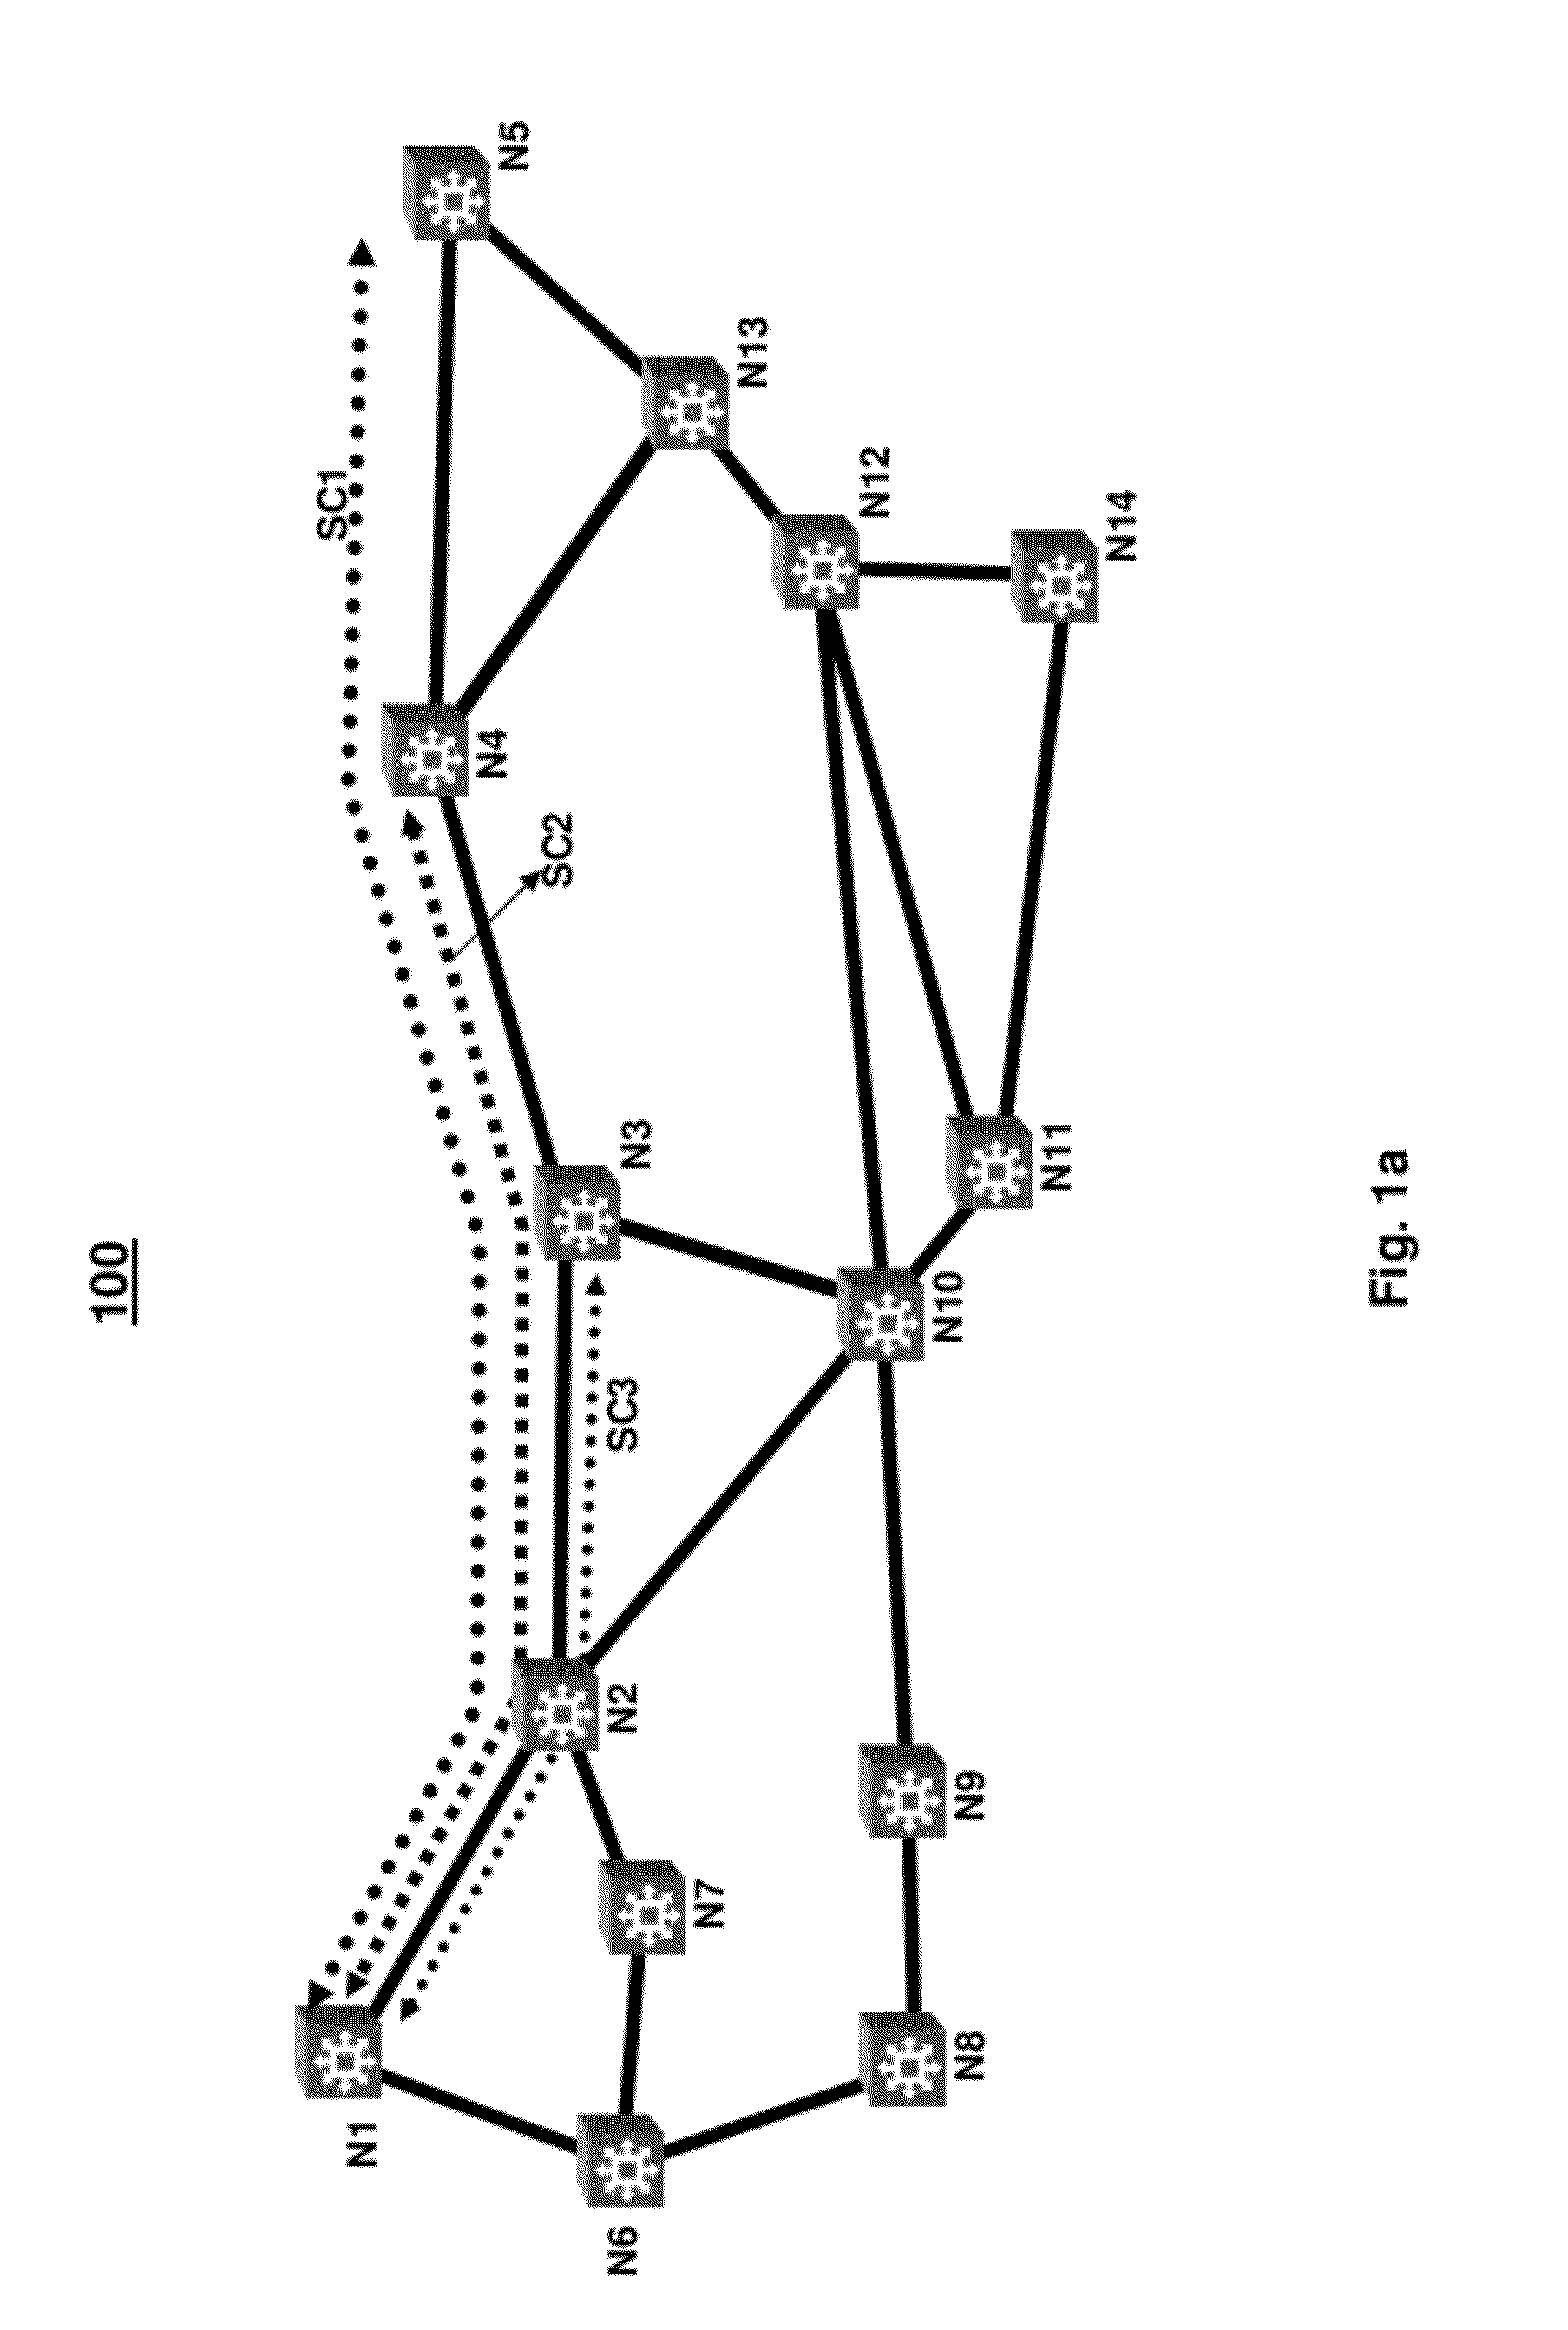 Multiplexer and Modulation Arrangements for Multi-Carrier Optical Modems